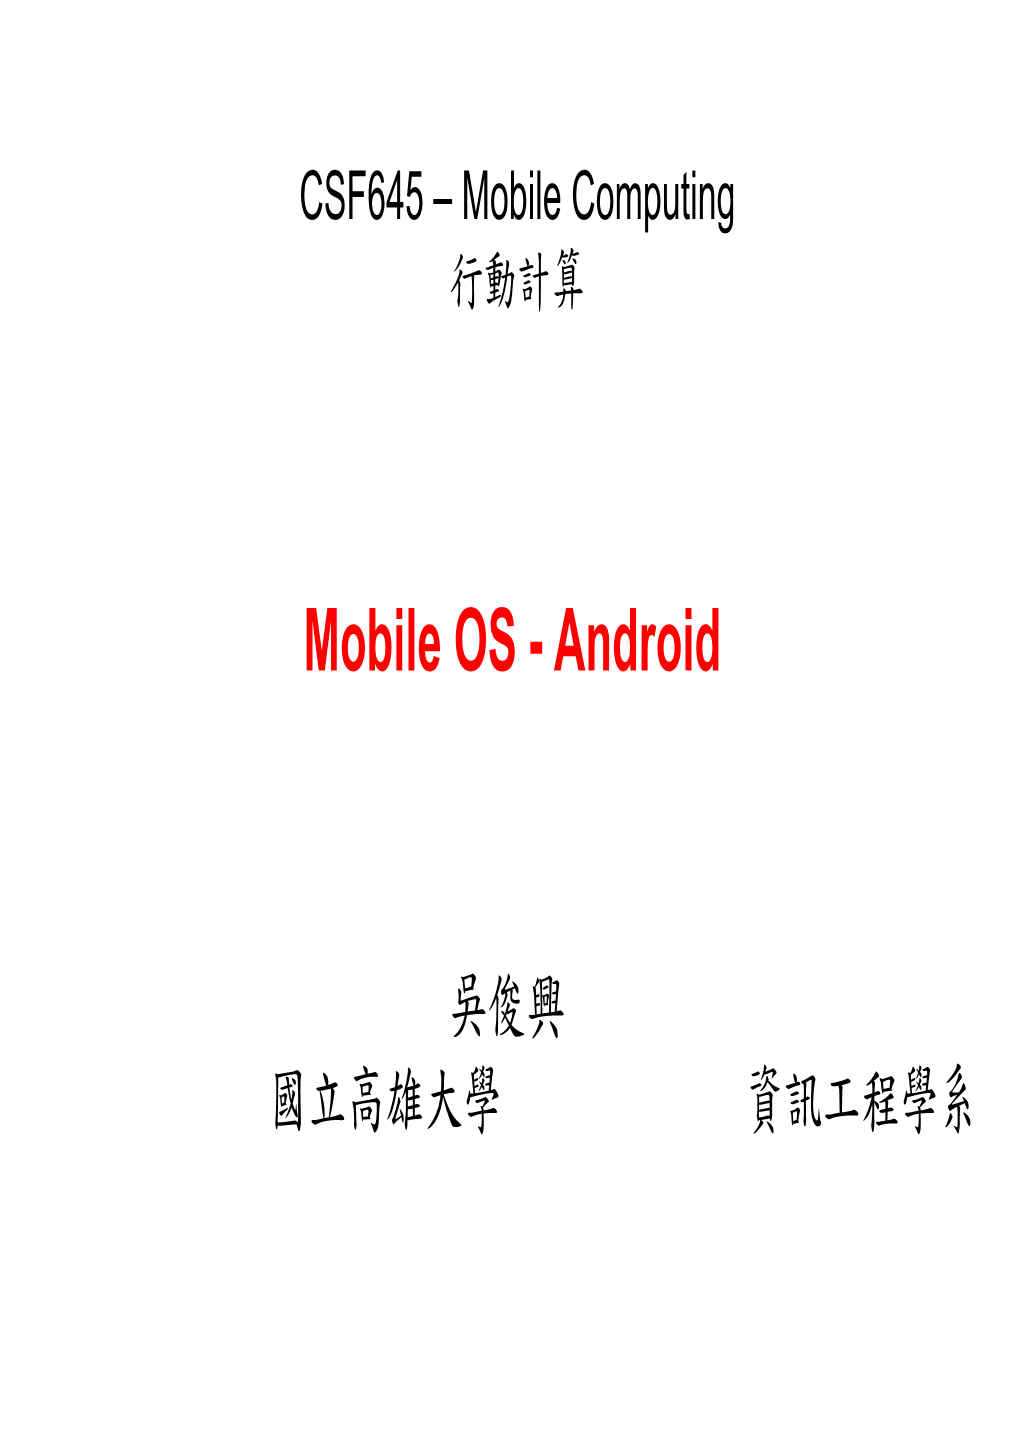 Mobile OS - Android